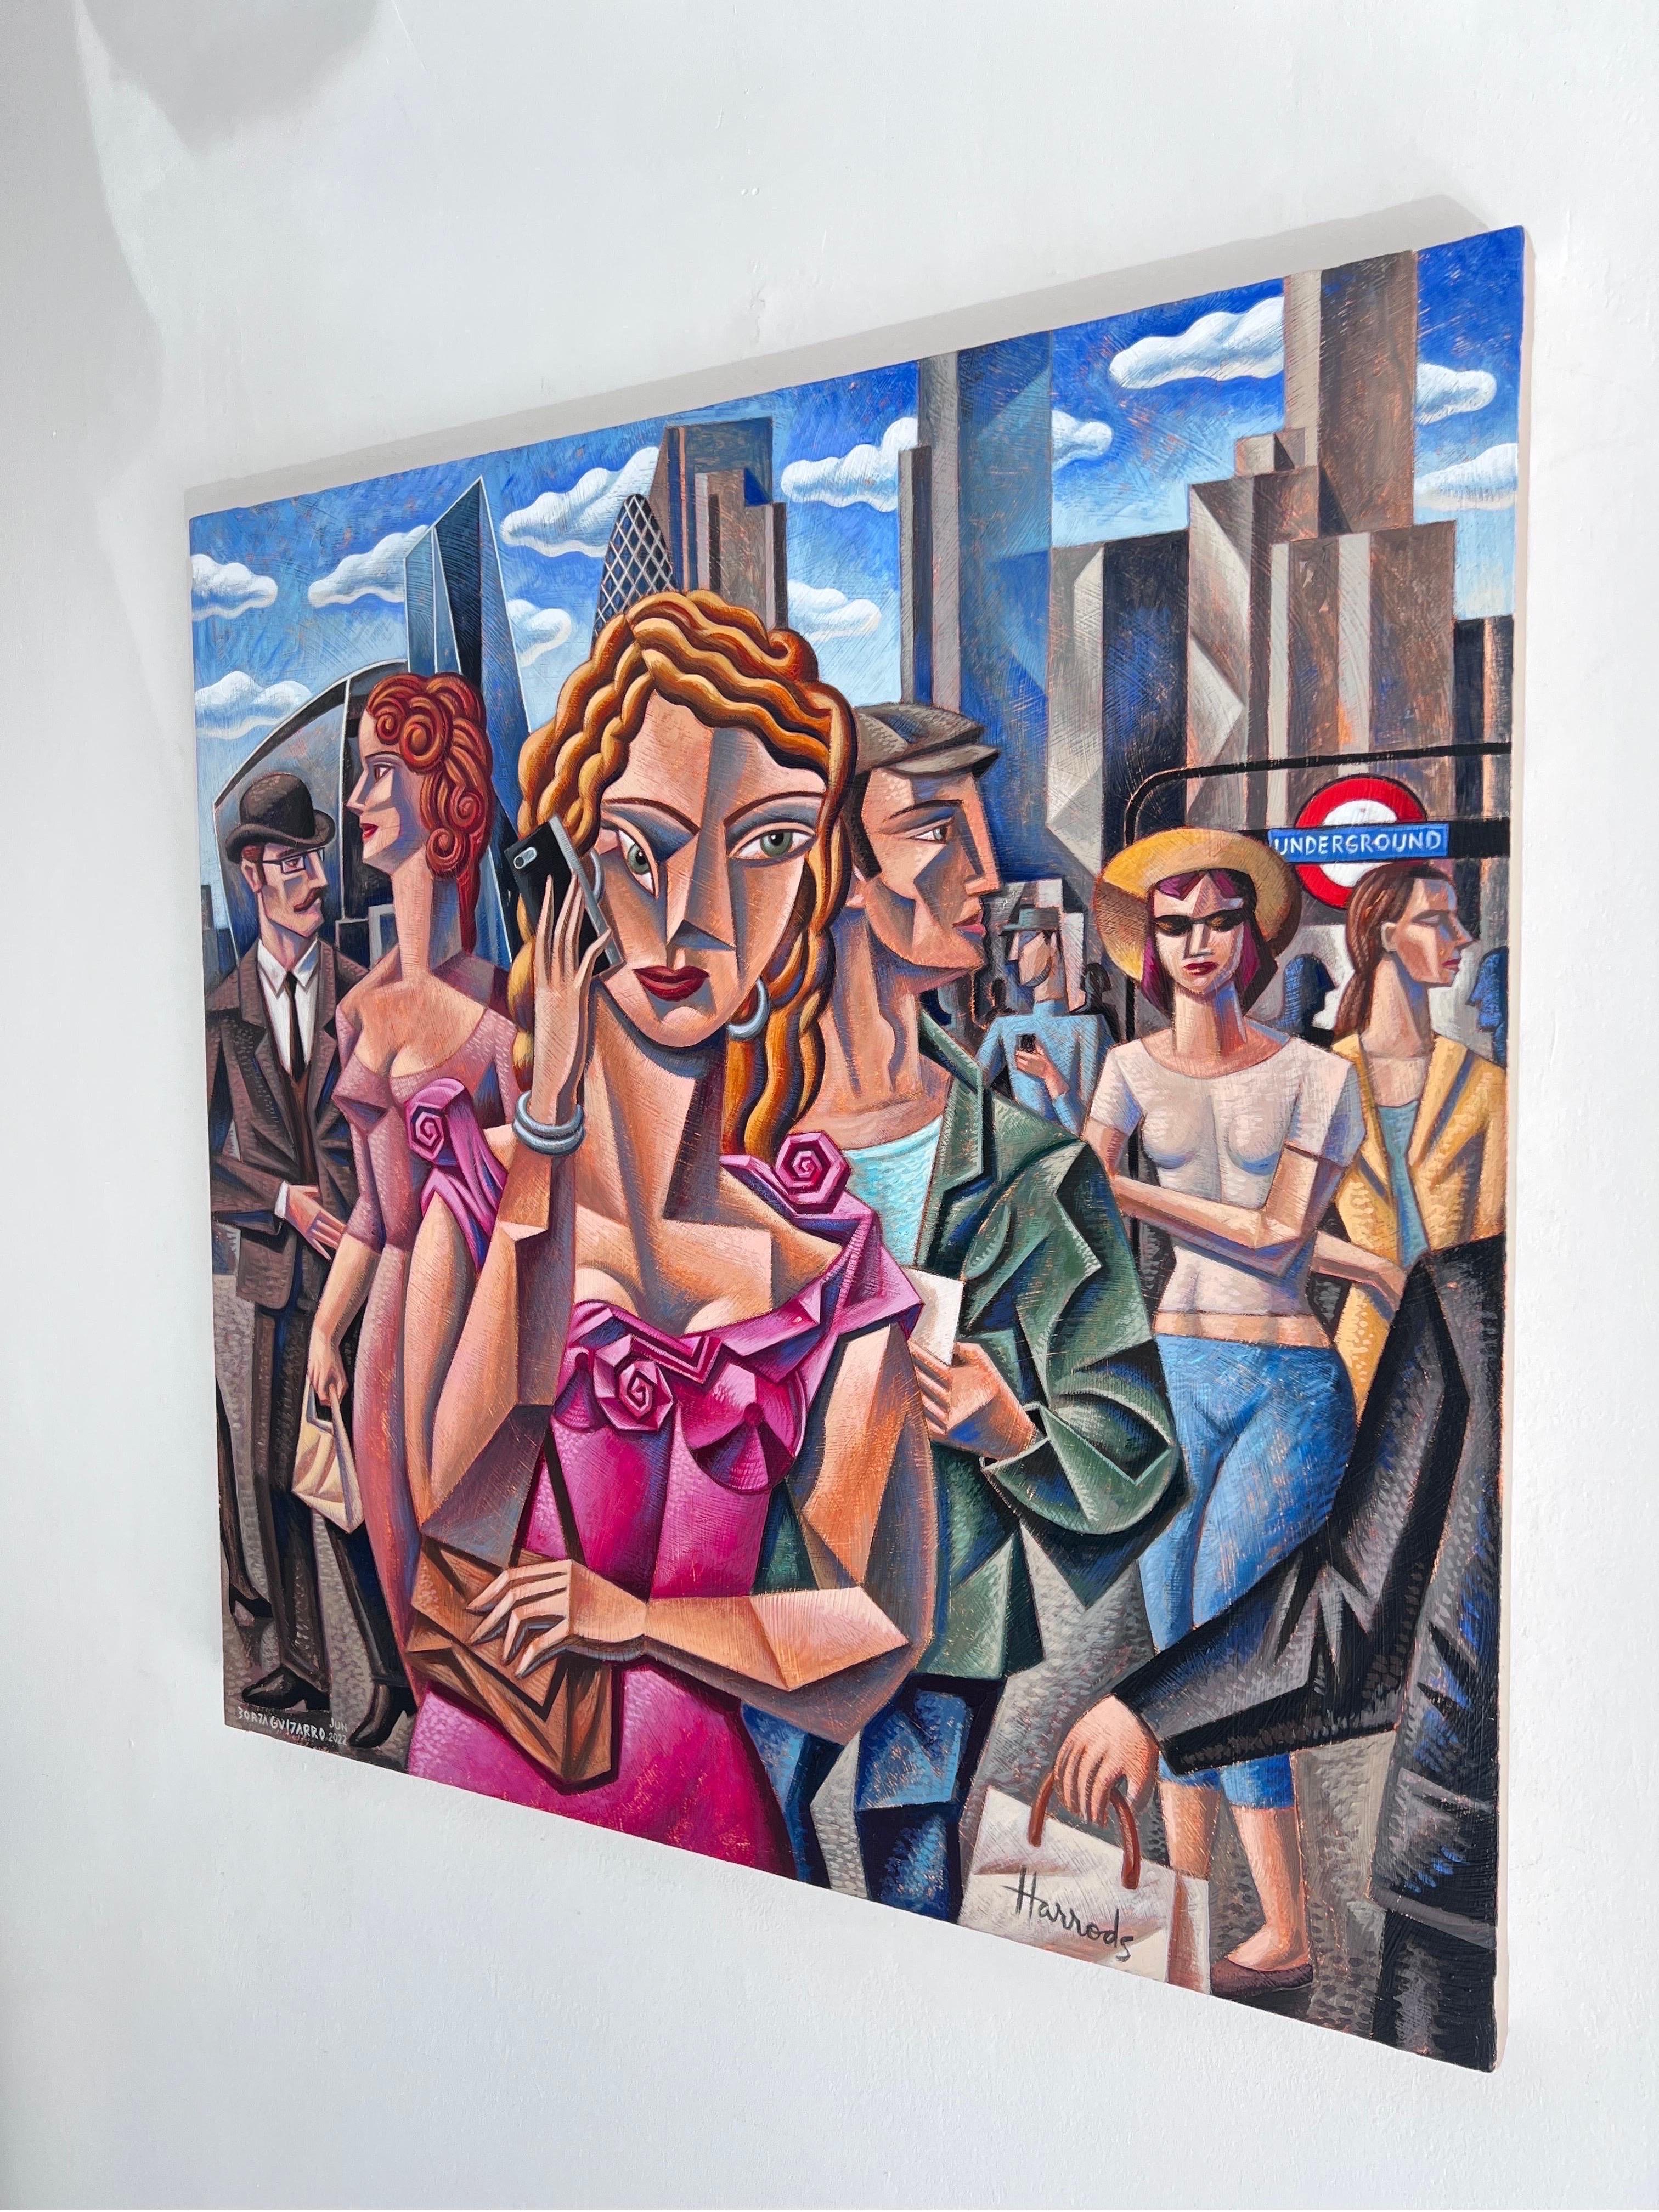 London People I-Original cubism figurative-cityscape painting-contemporary Art - Abstract Painting by Borja Guijarro